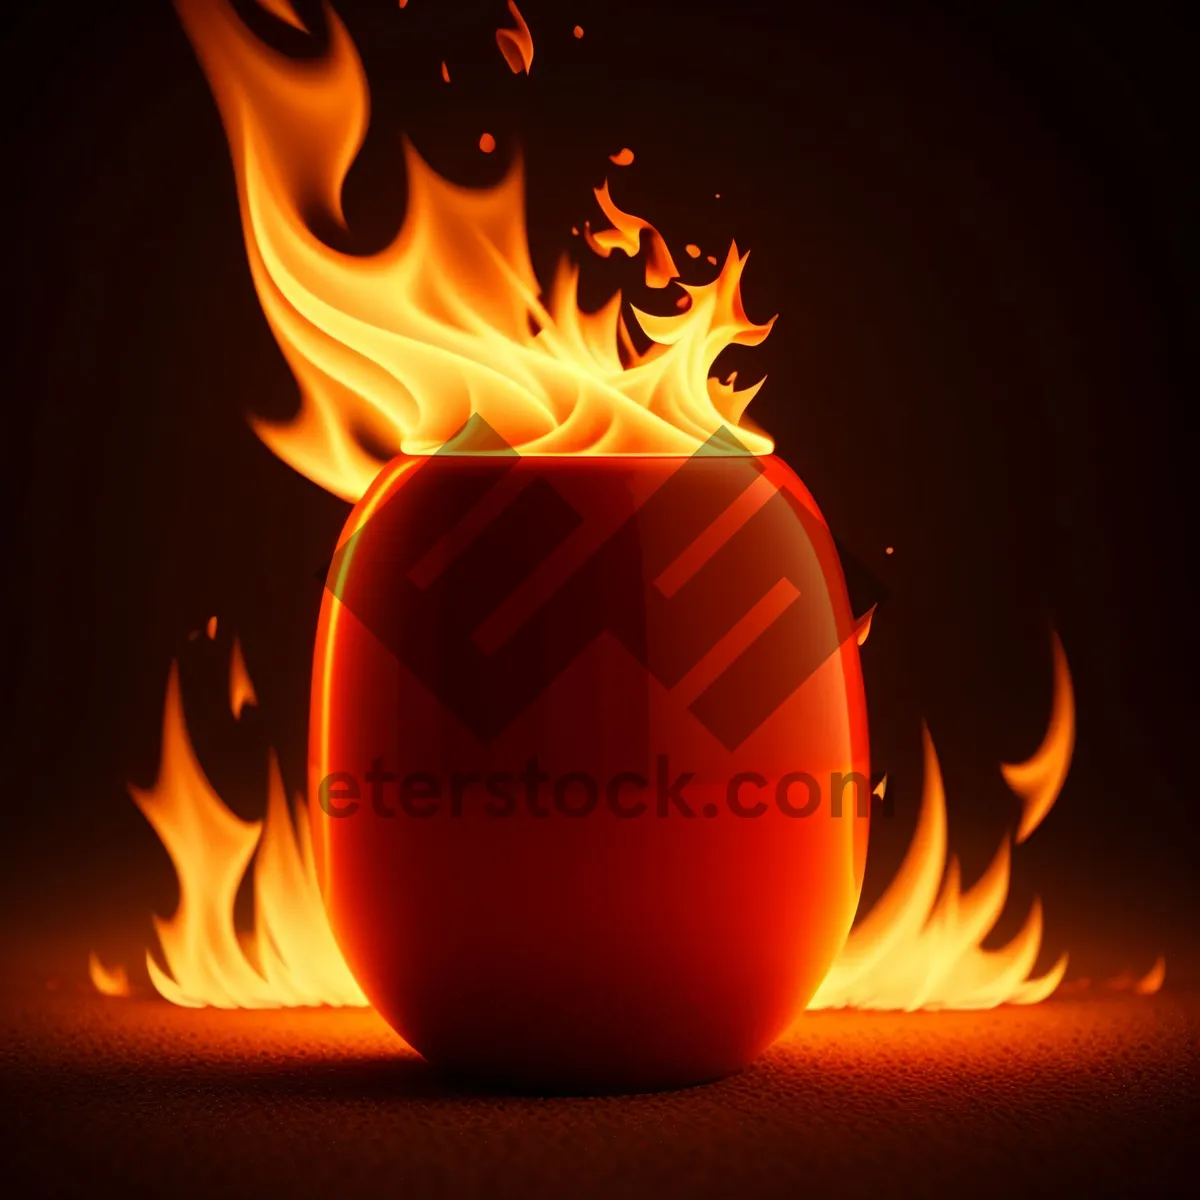 Picture of Blazing Hearth: Iconic Heat of a Fiery Flame